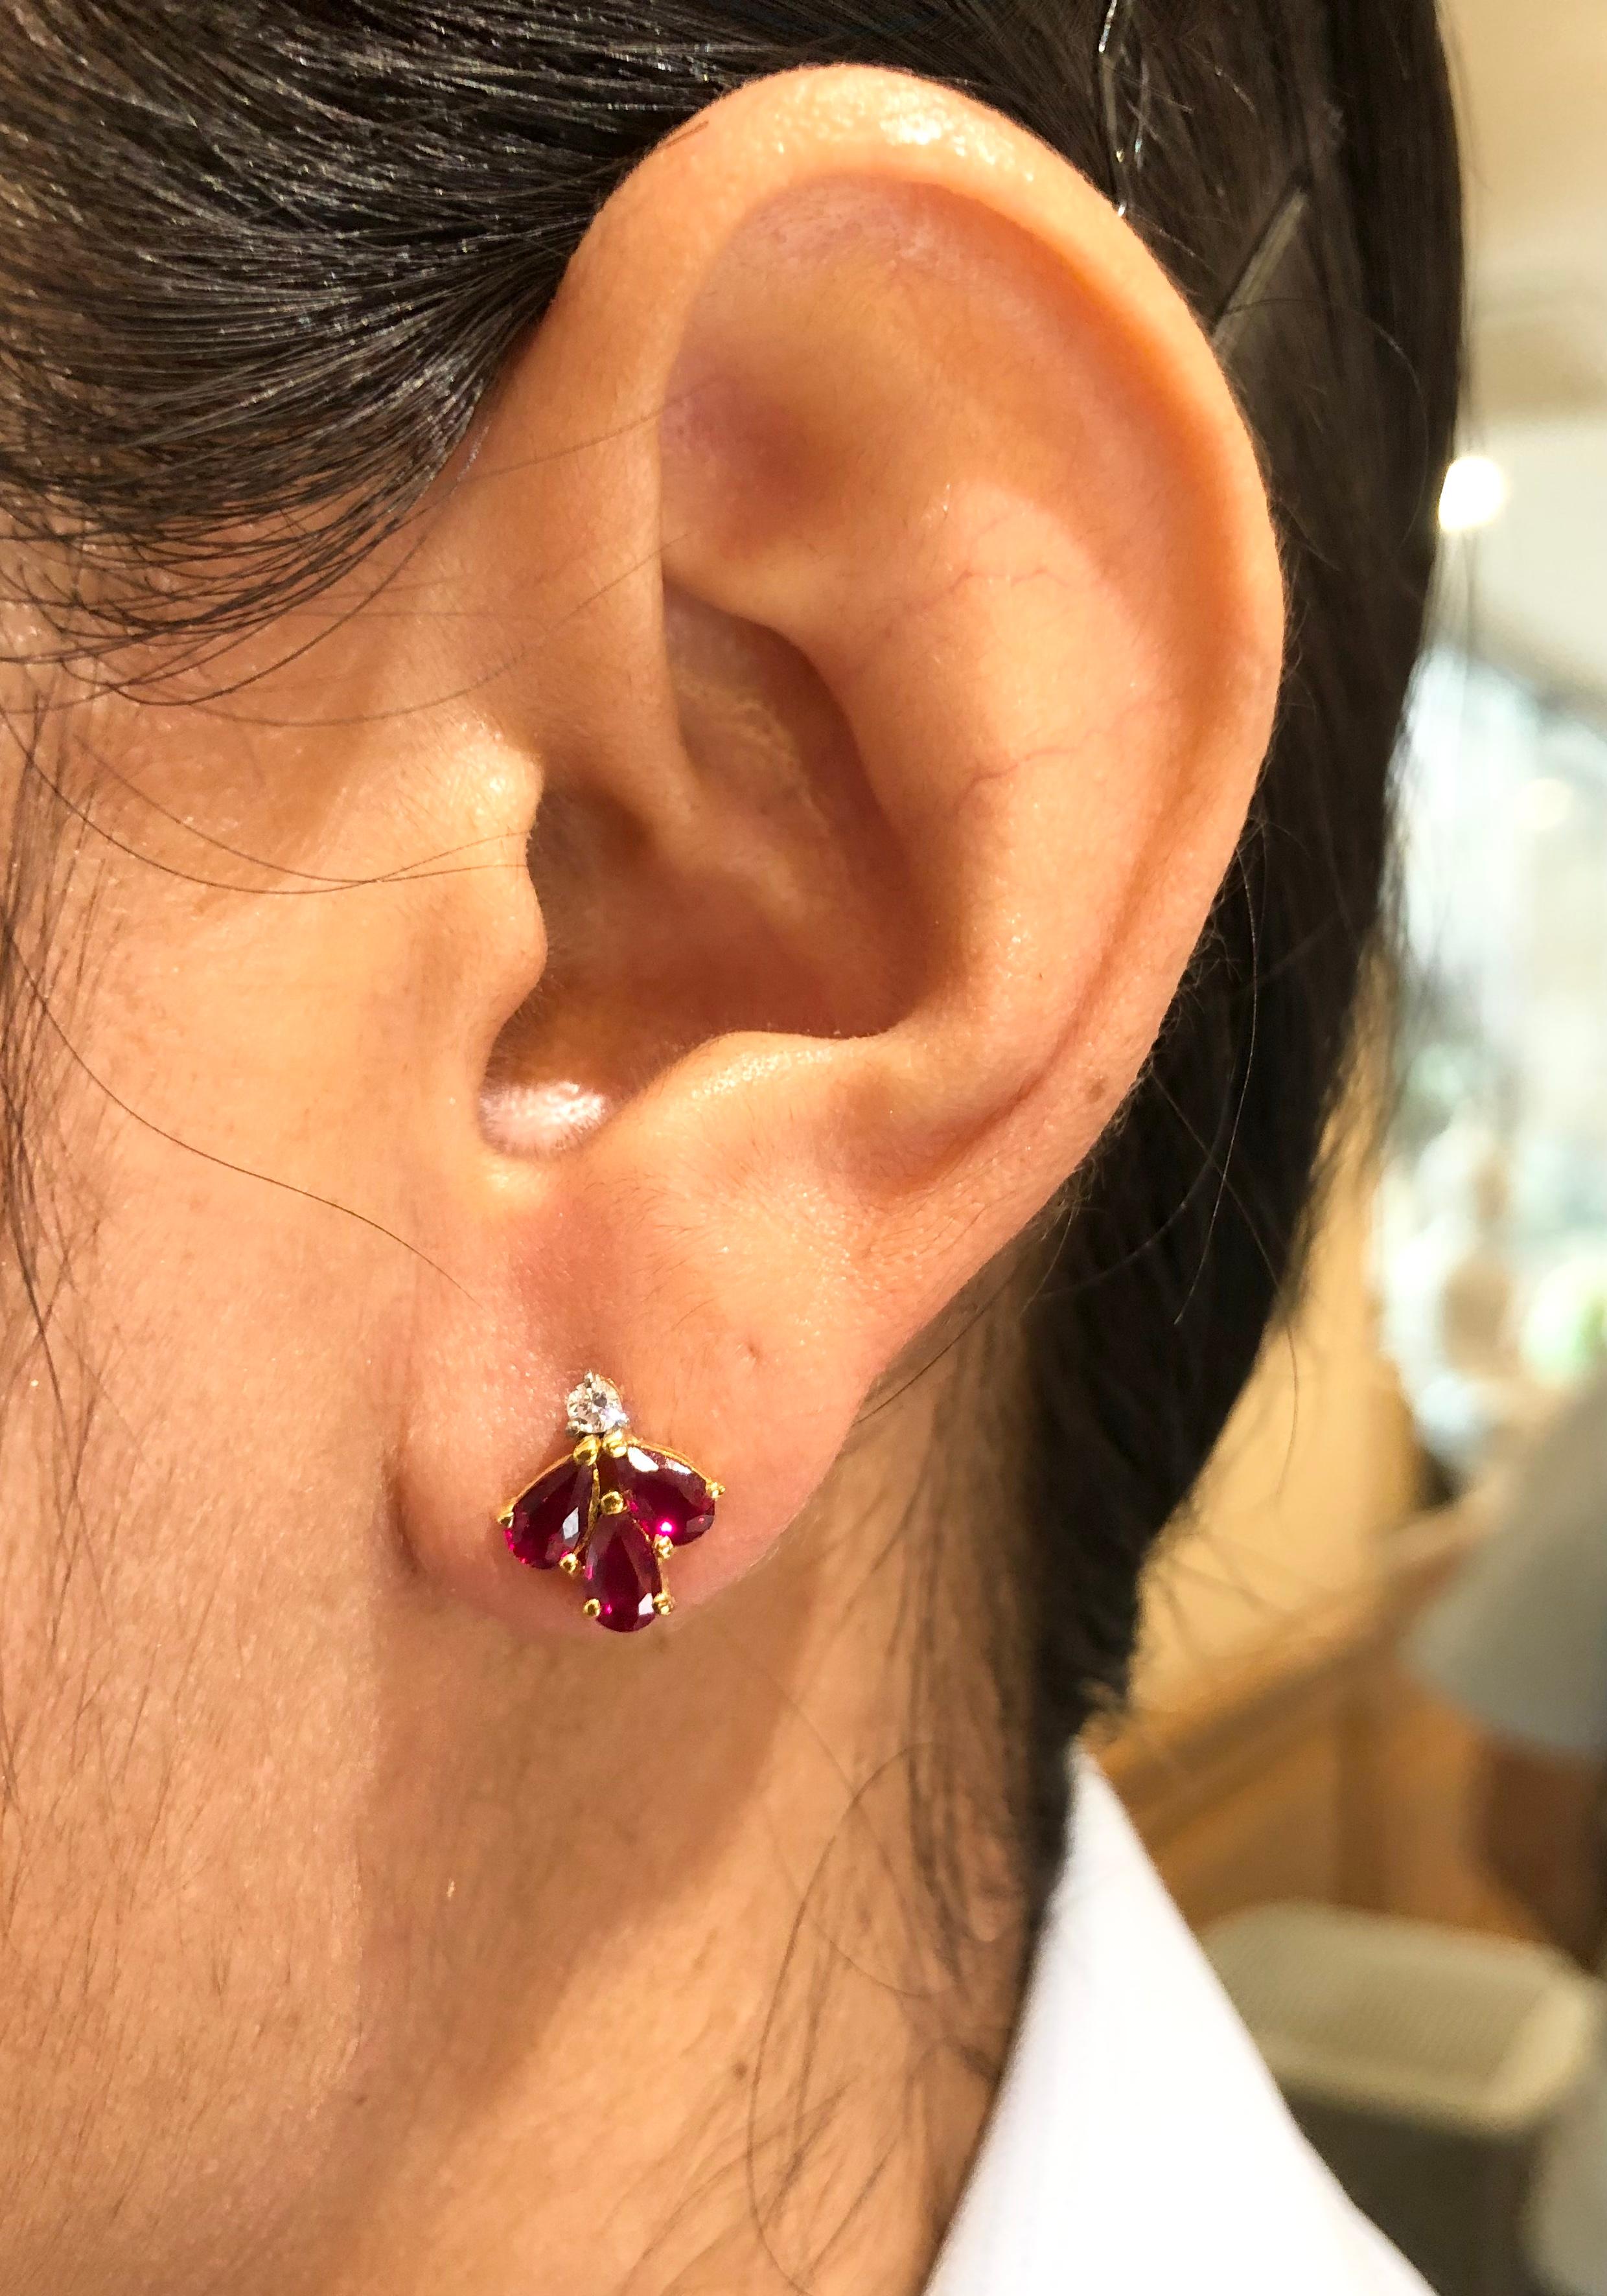 Ruby 1.59 carats with Diamond 0.09 carat Earrings set in 18 Karat Gold Settings

Width:   0.90 cm 
Length:  1.10 cm
Total Weight: 4.0 grams

